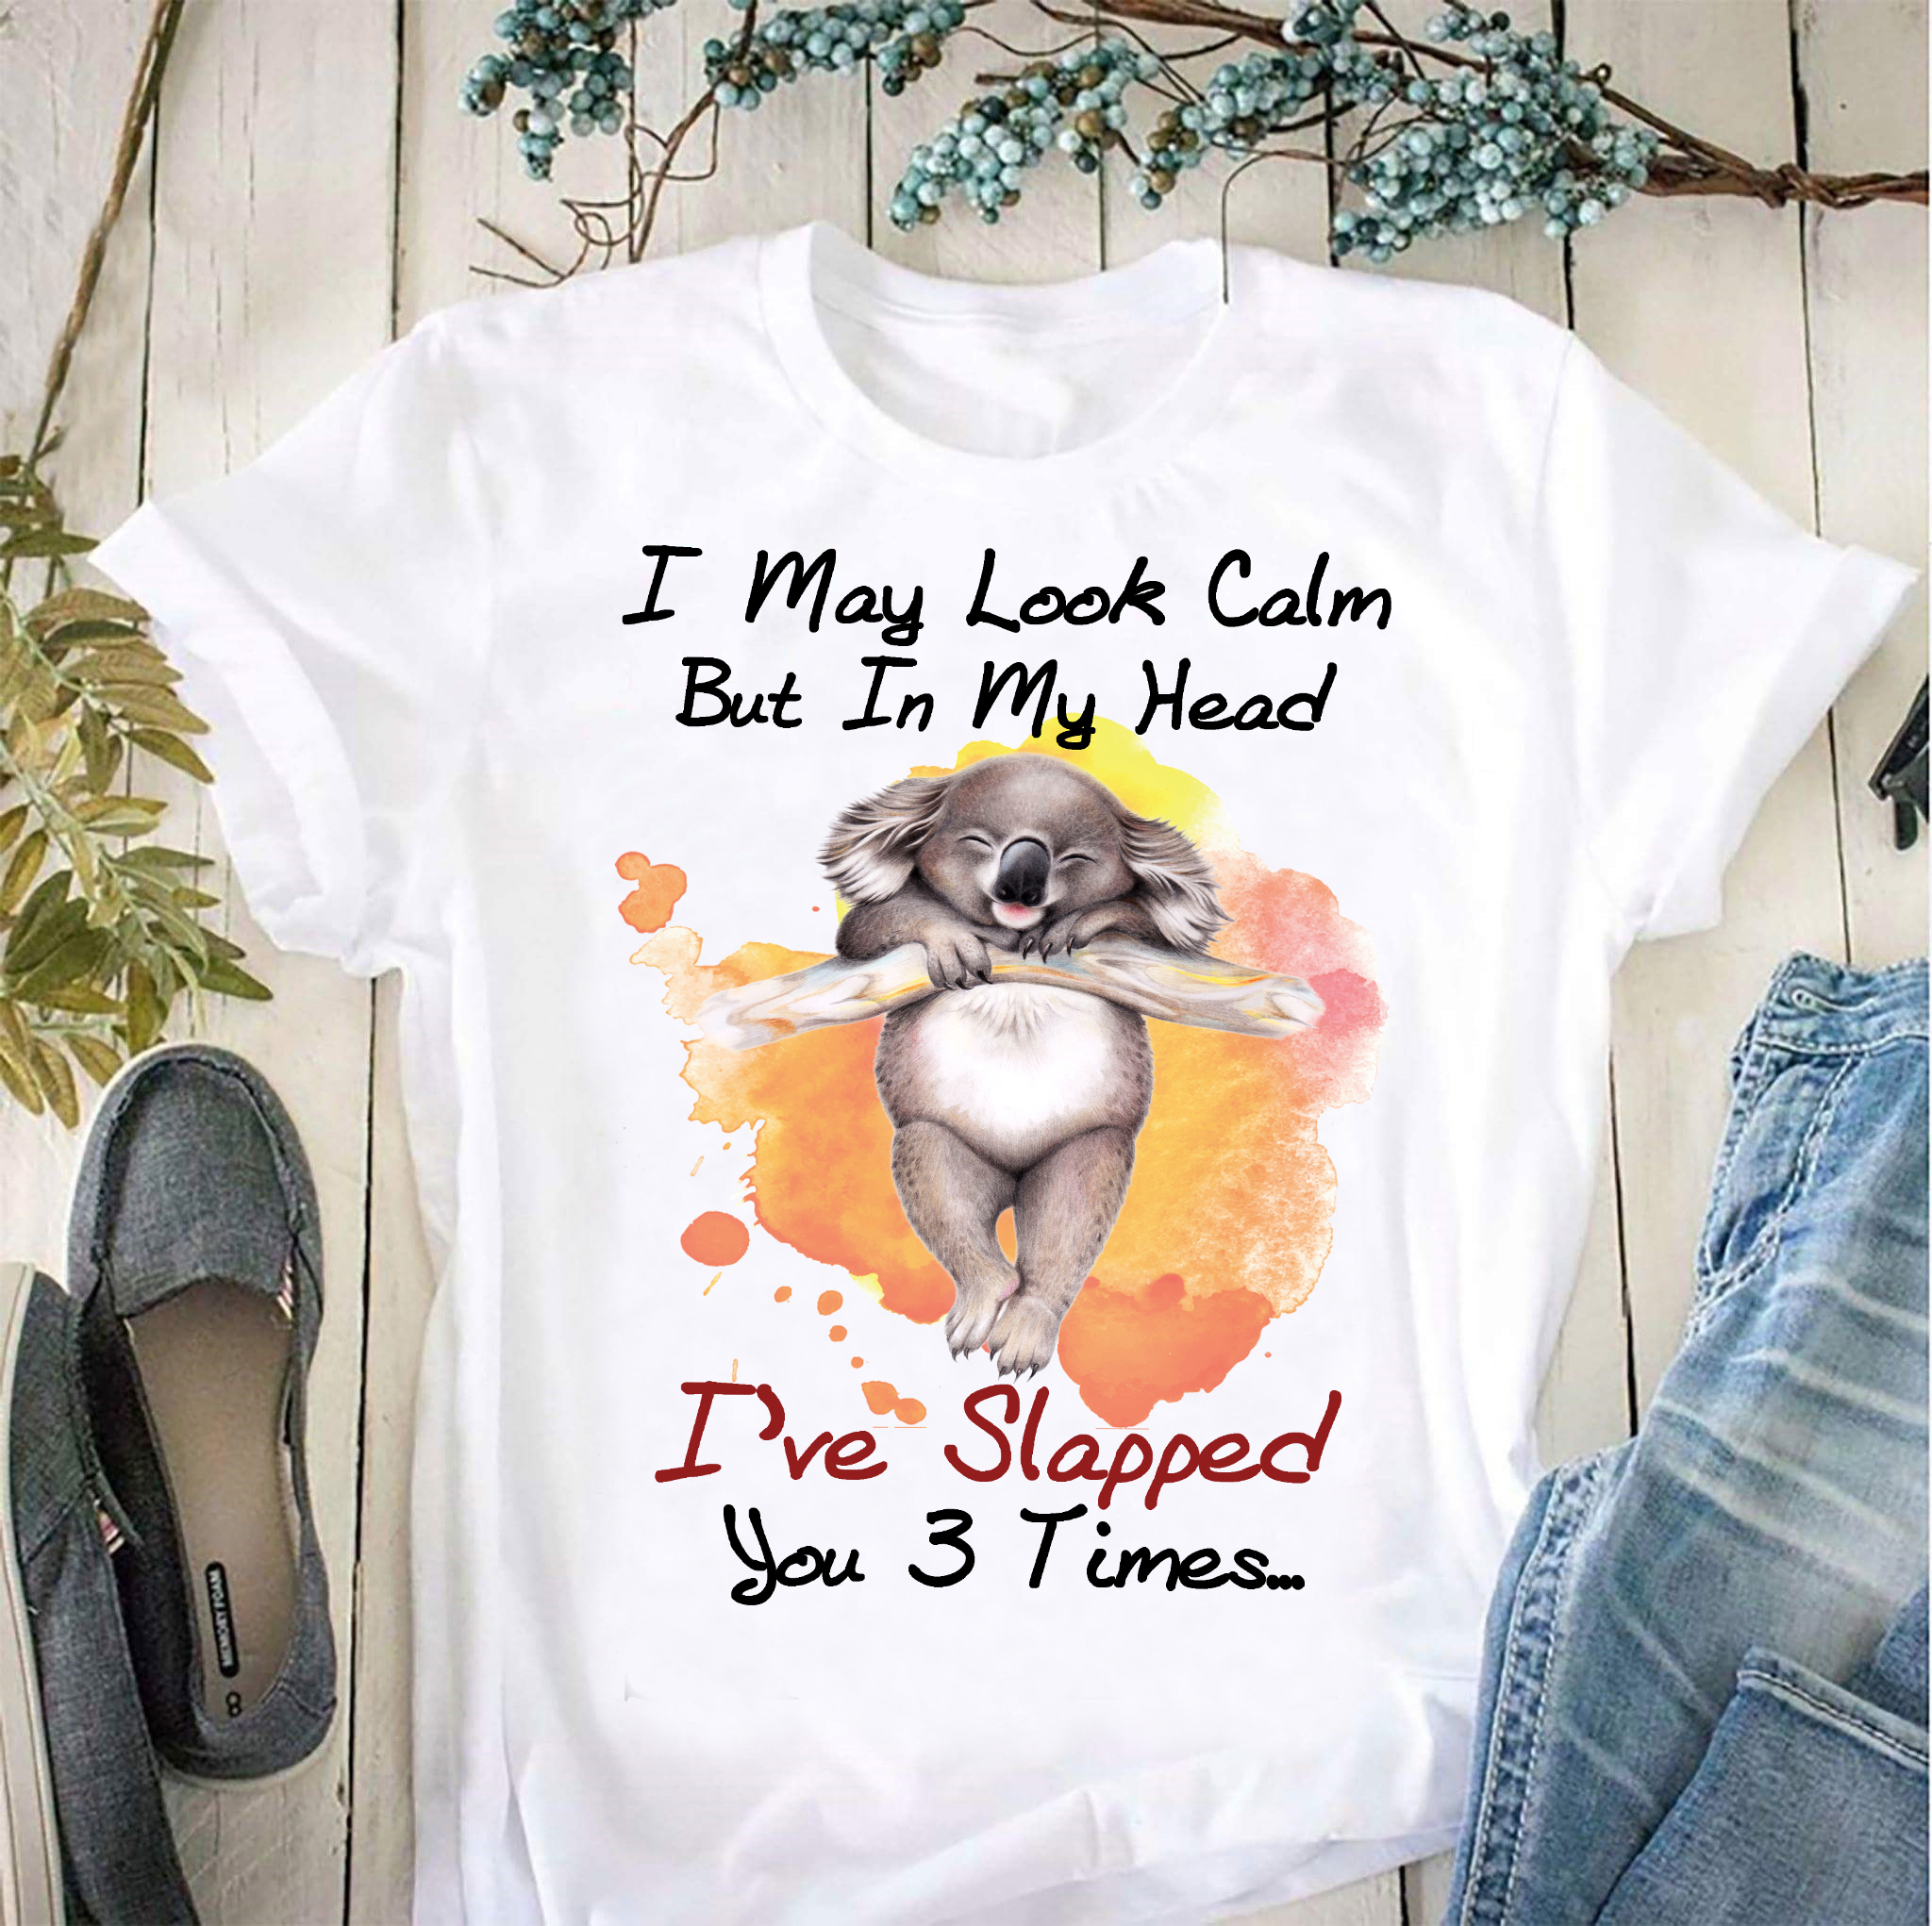 I may look calm but in my head I've slapped you 3 time - Koala lover